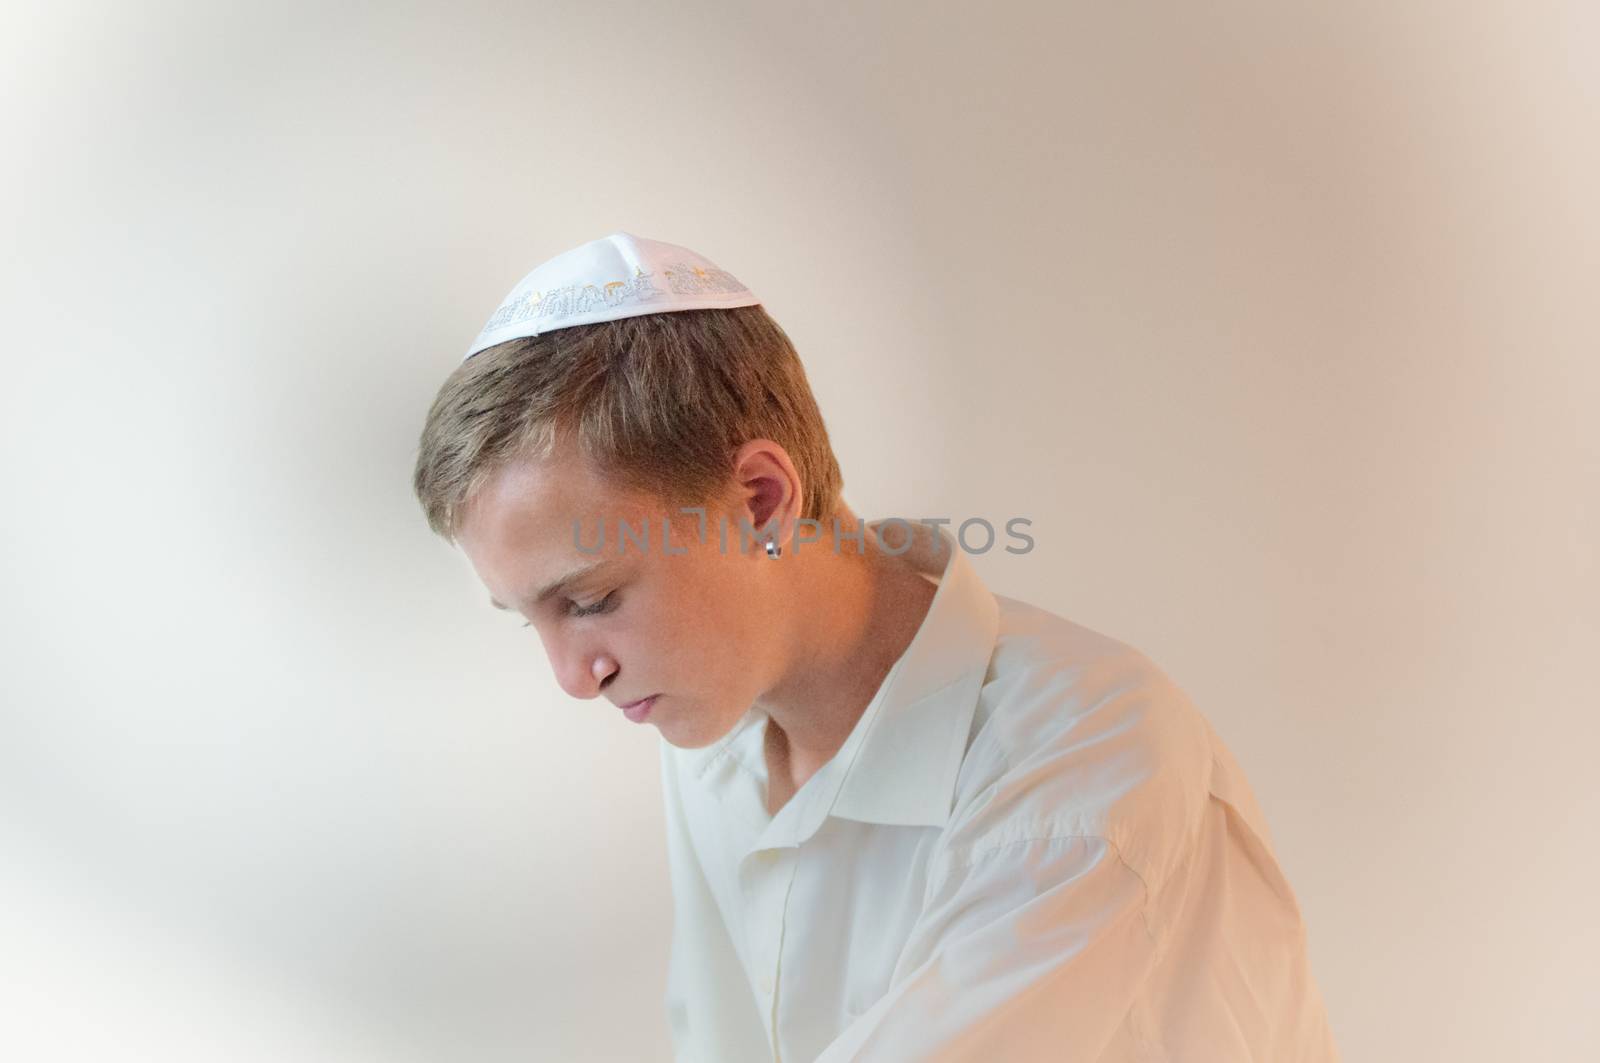 Religious Jewish teenager by LarisaP